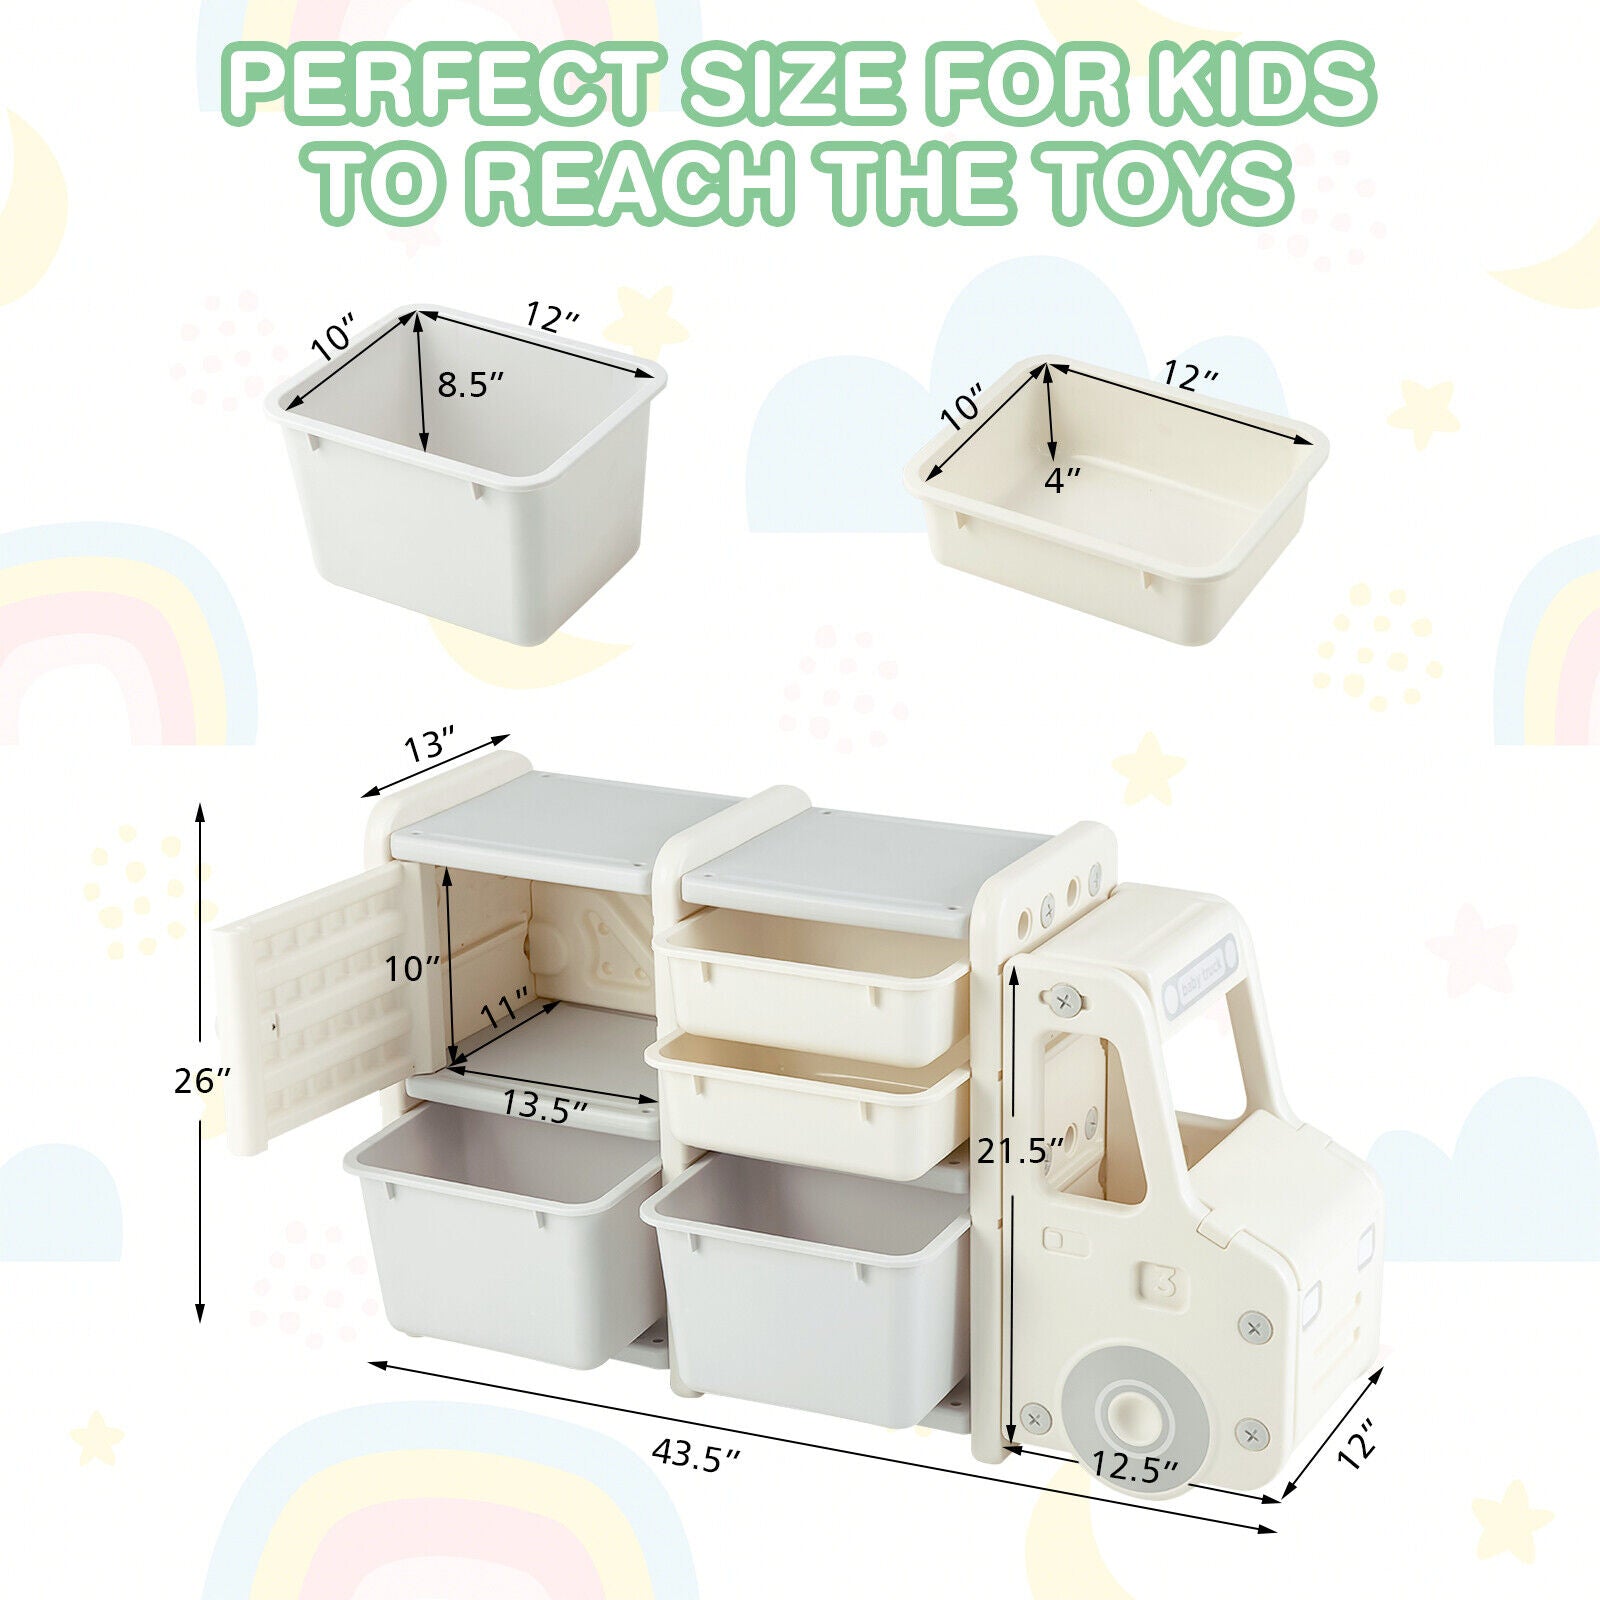 Encourages Organizational Skills: With dimensions of 43.5"L x 13"W x 26"H, this storage cabinet is designed for easy access by children. The various storage options help kids learn to categorize their belongings and develop good organizational habits.